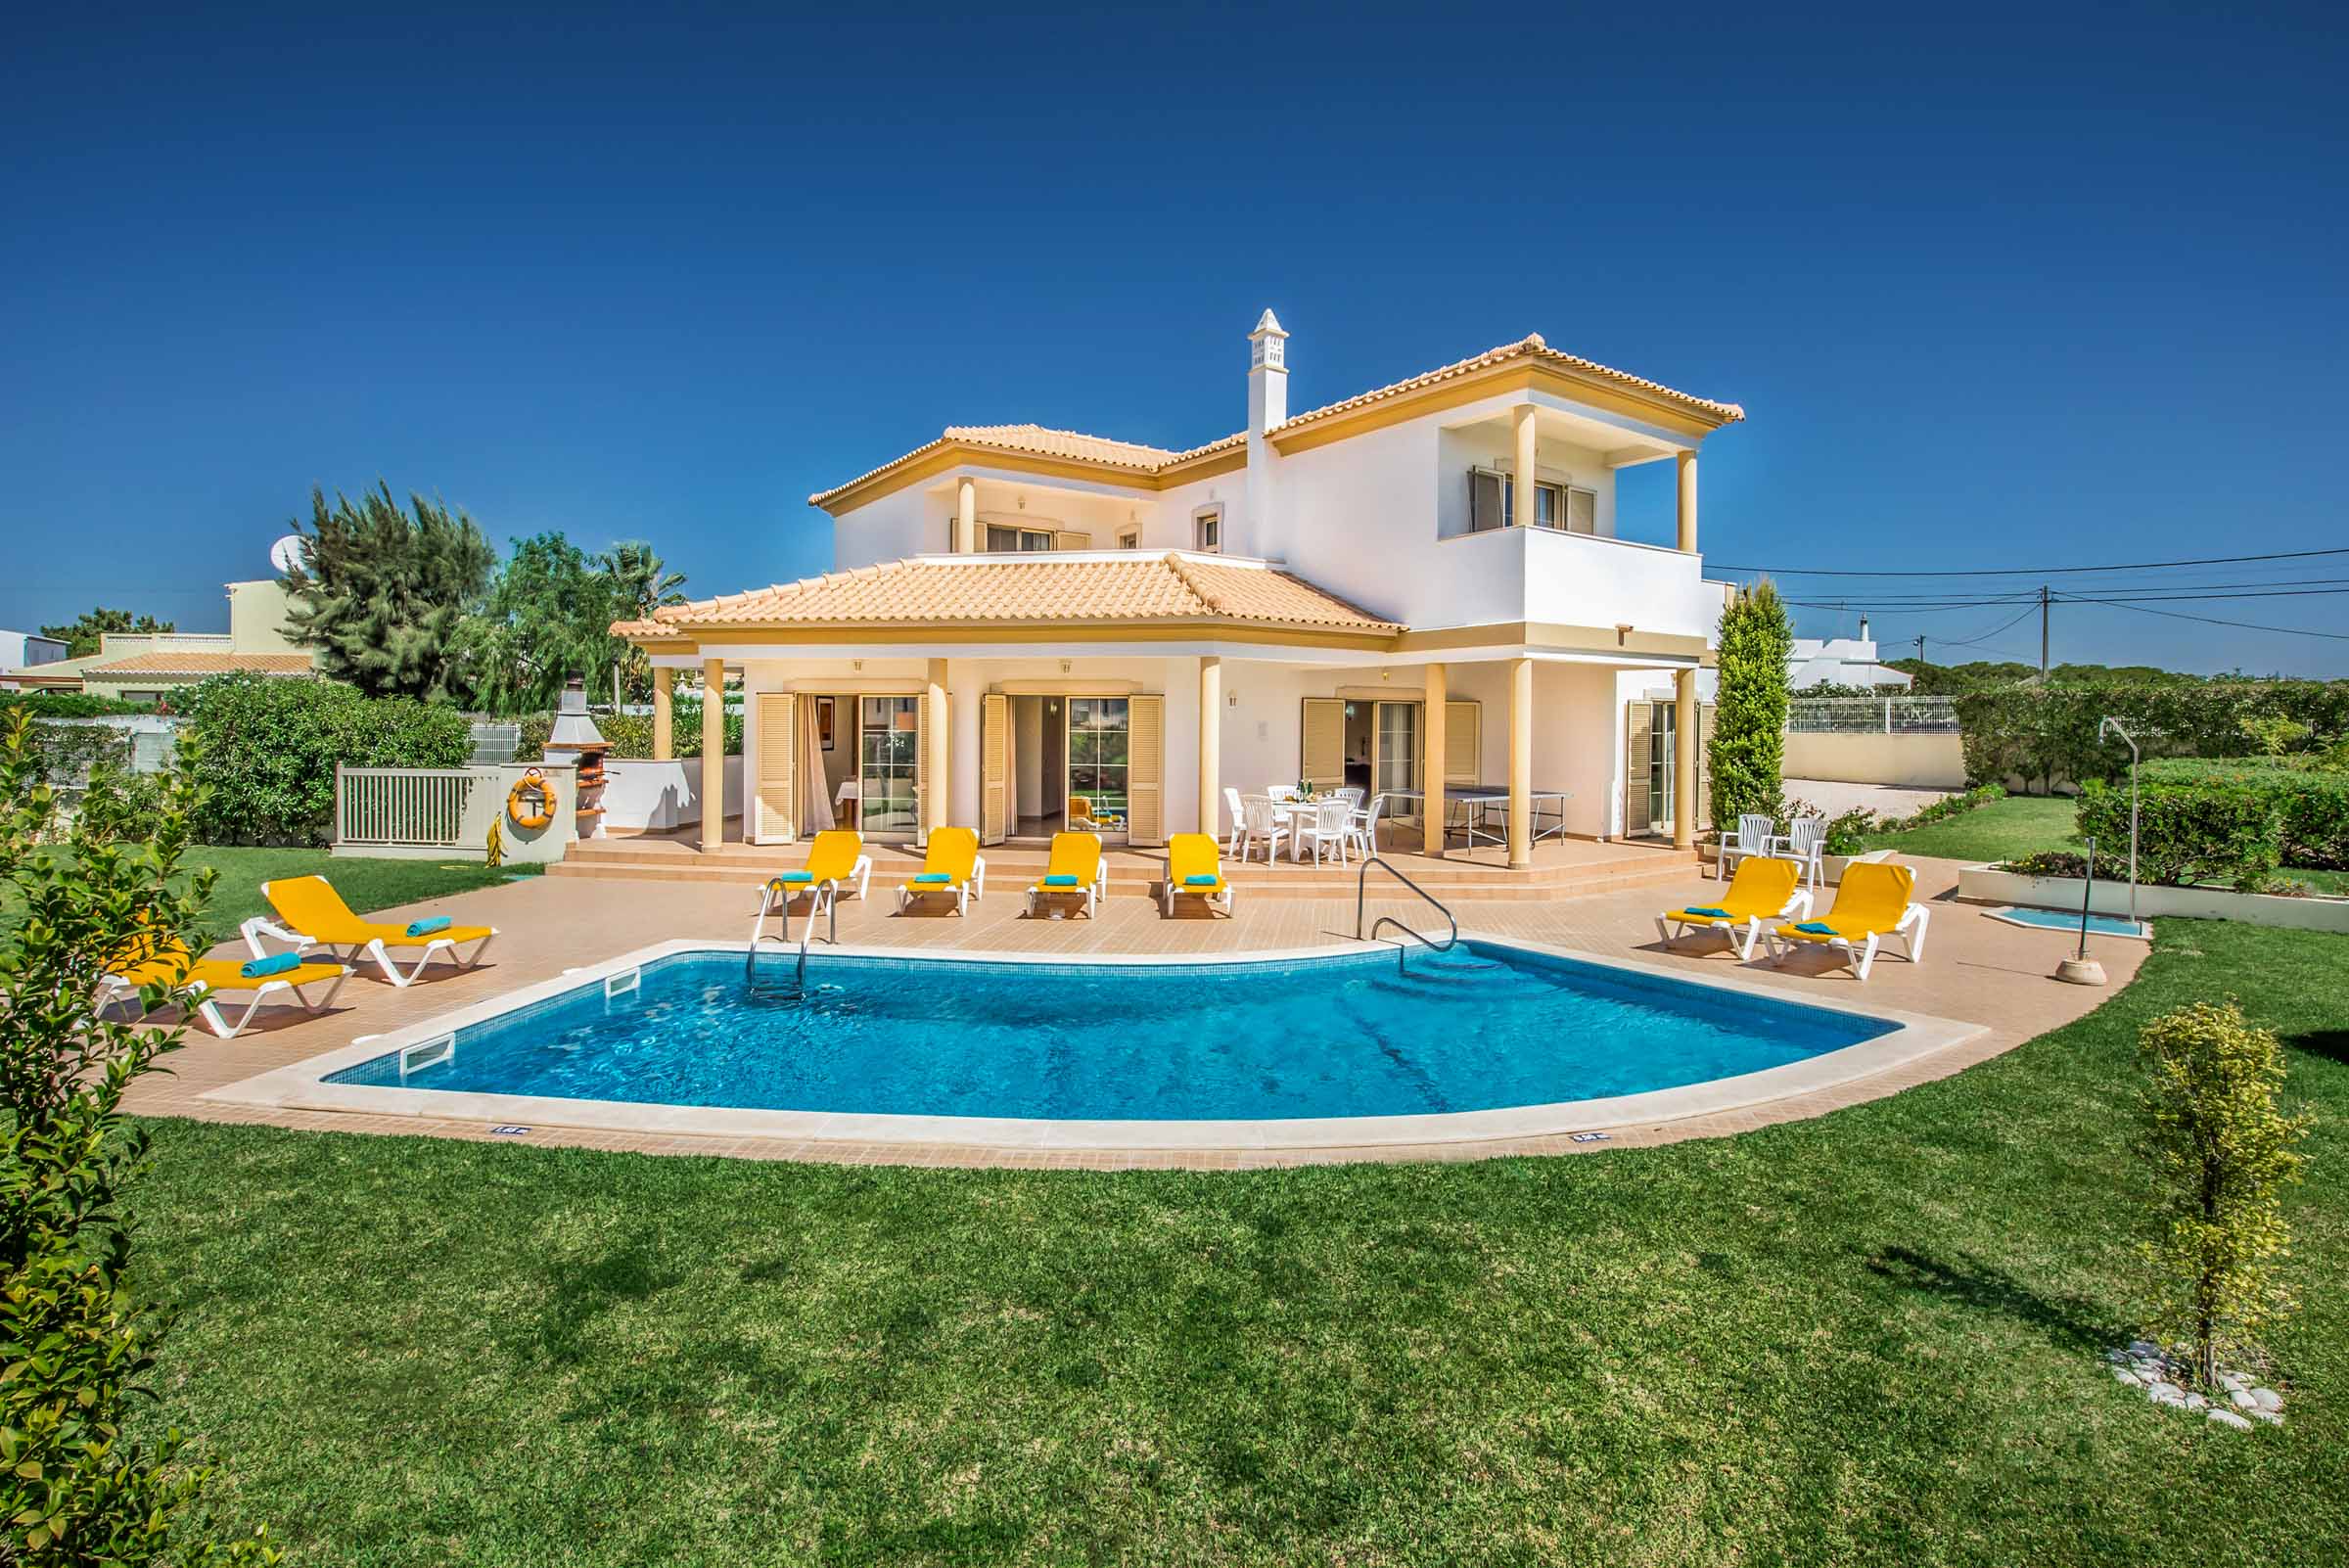 Property Image 1 - Superb Bright Villa with Manicured Lawn and Sunny Pool